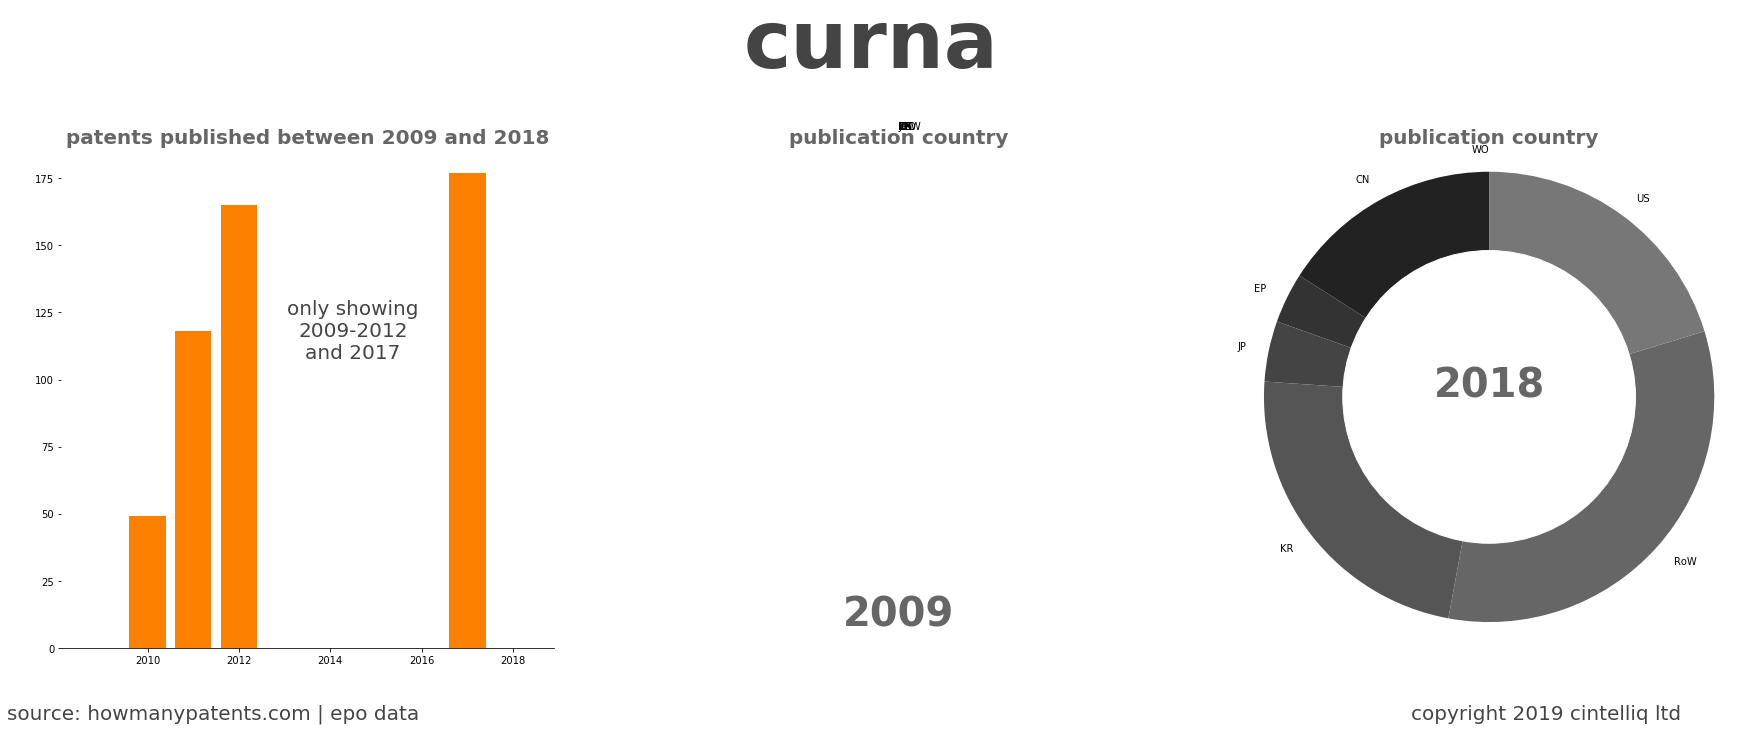 summary of patents for Curna